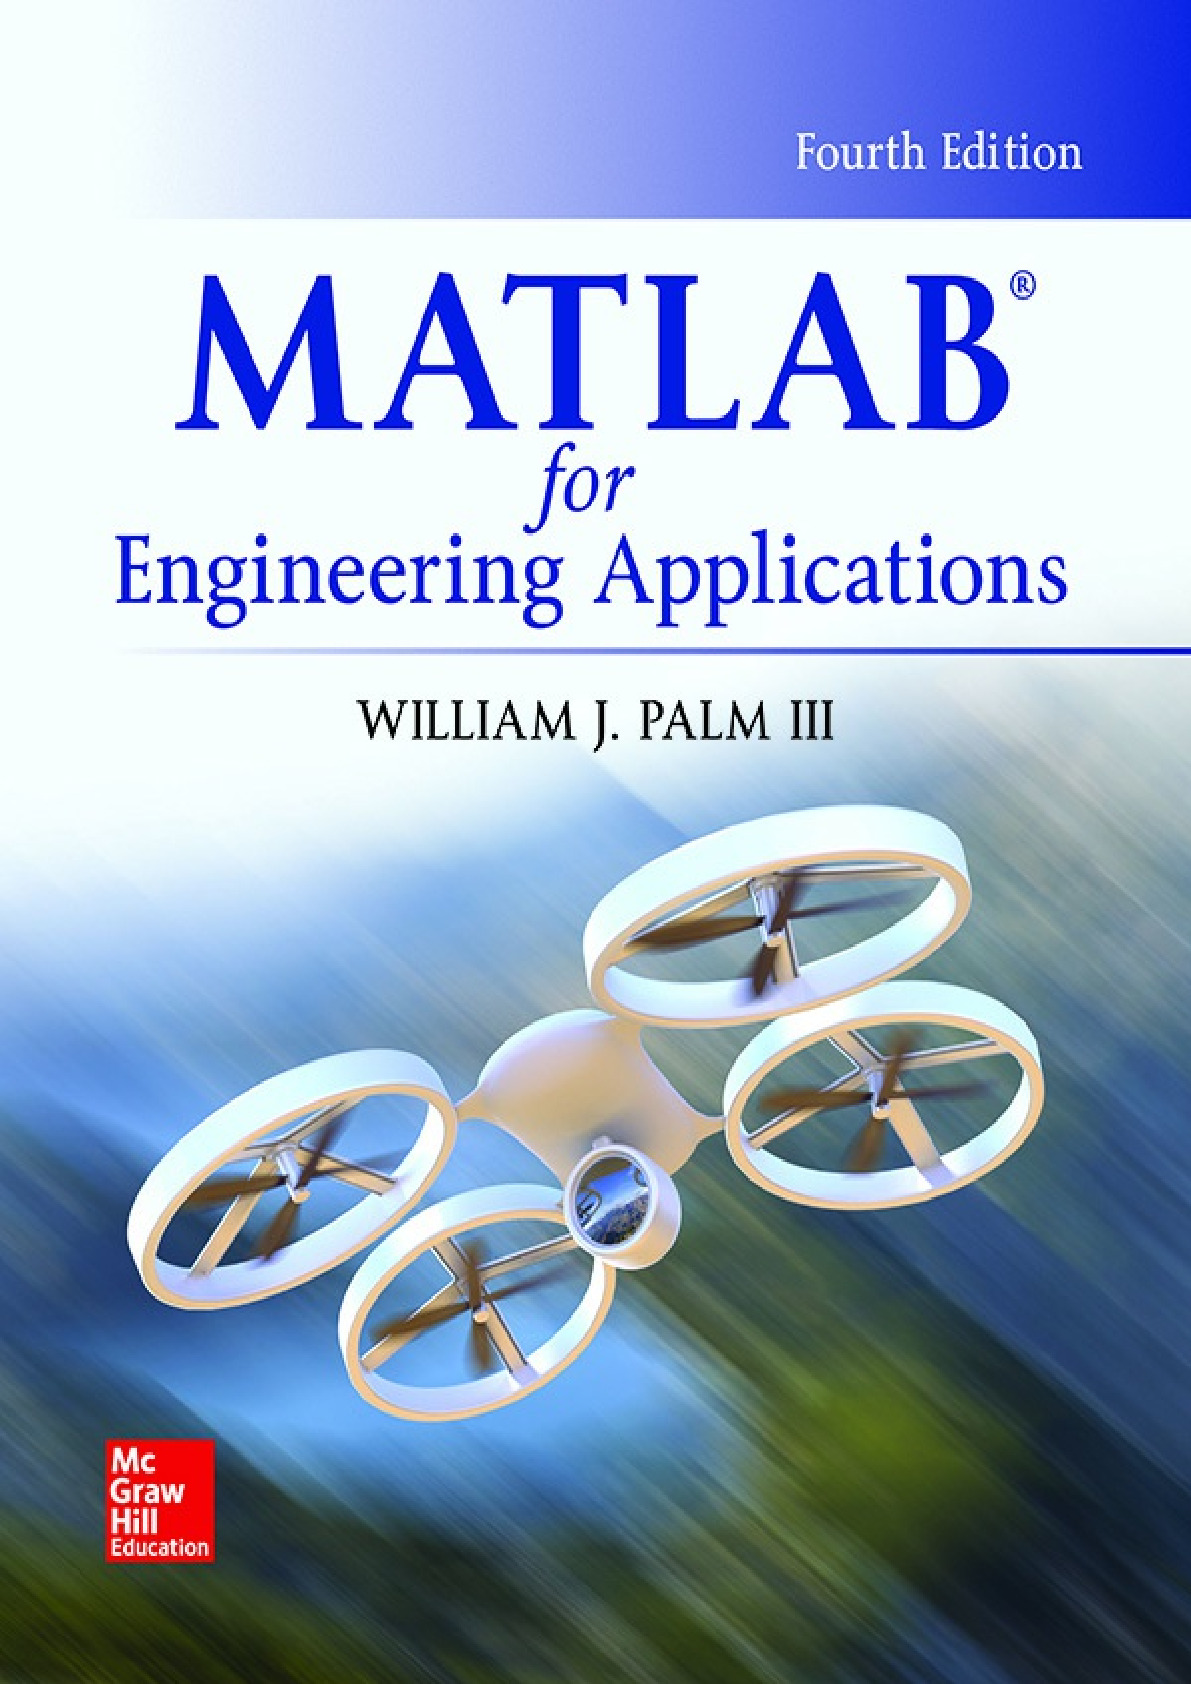 MATLAB for Engineering Applications (William J. Palm III)